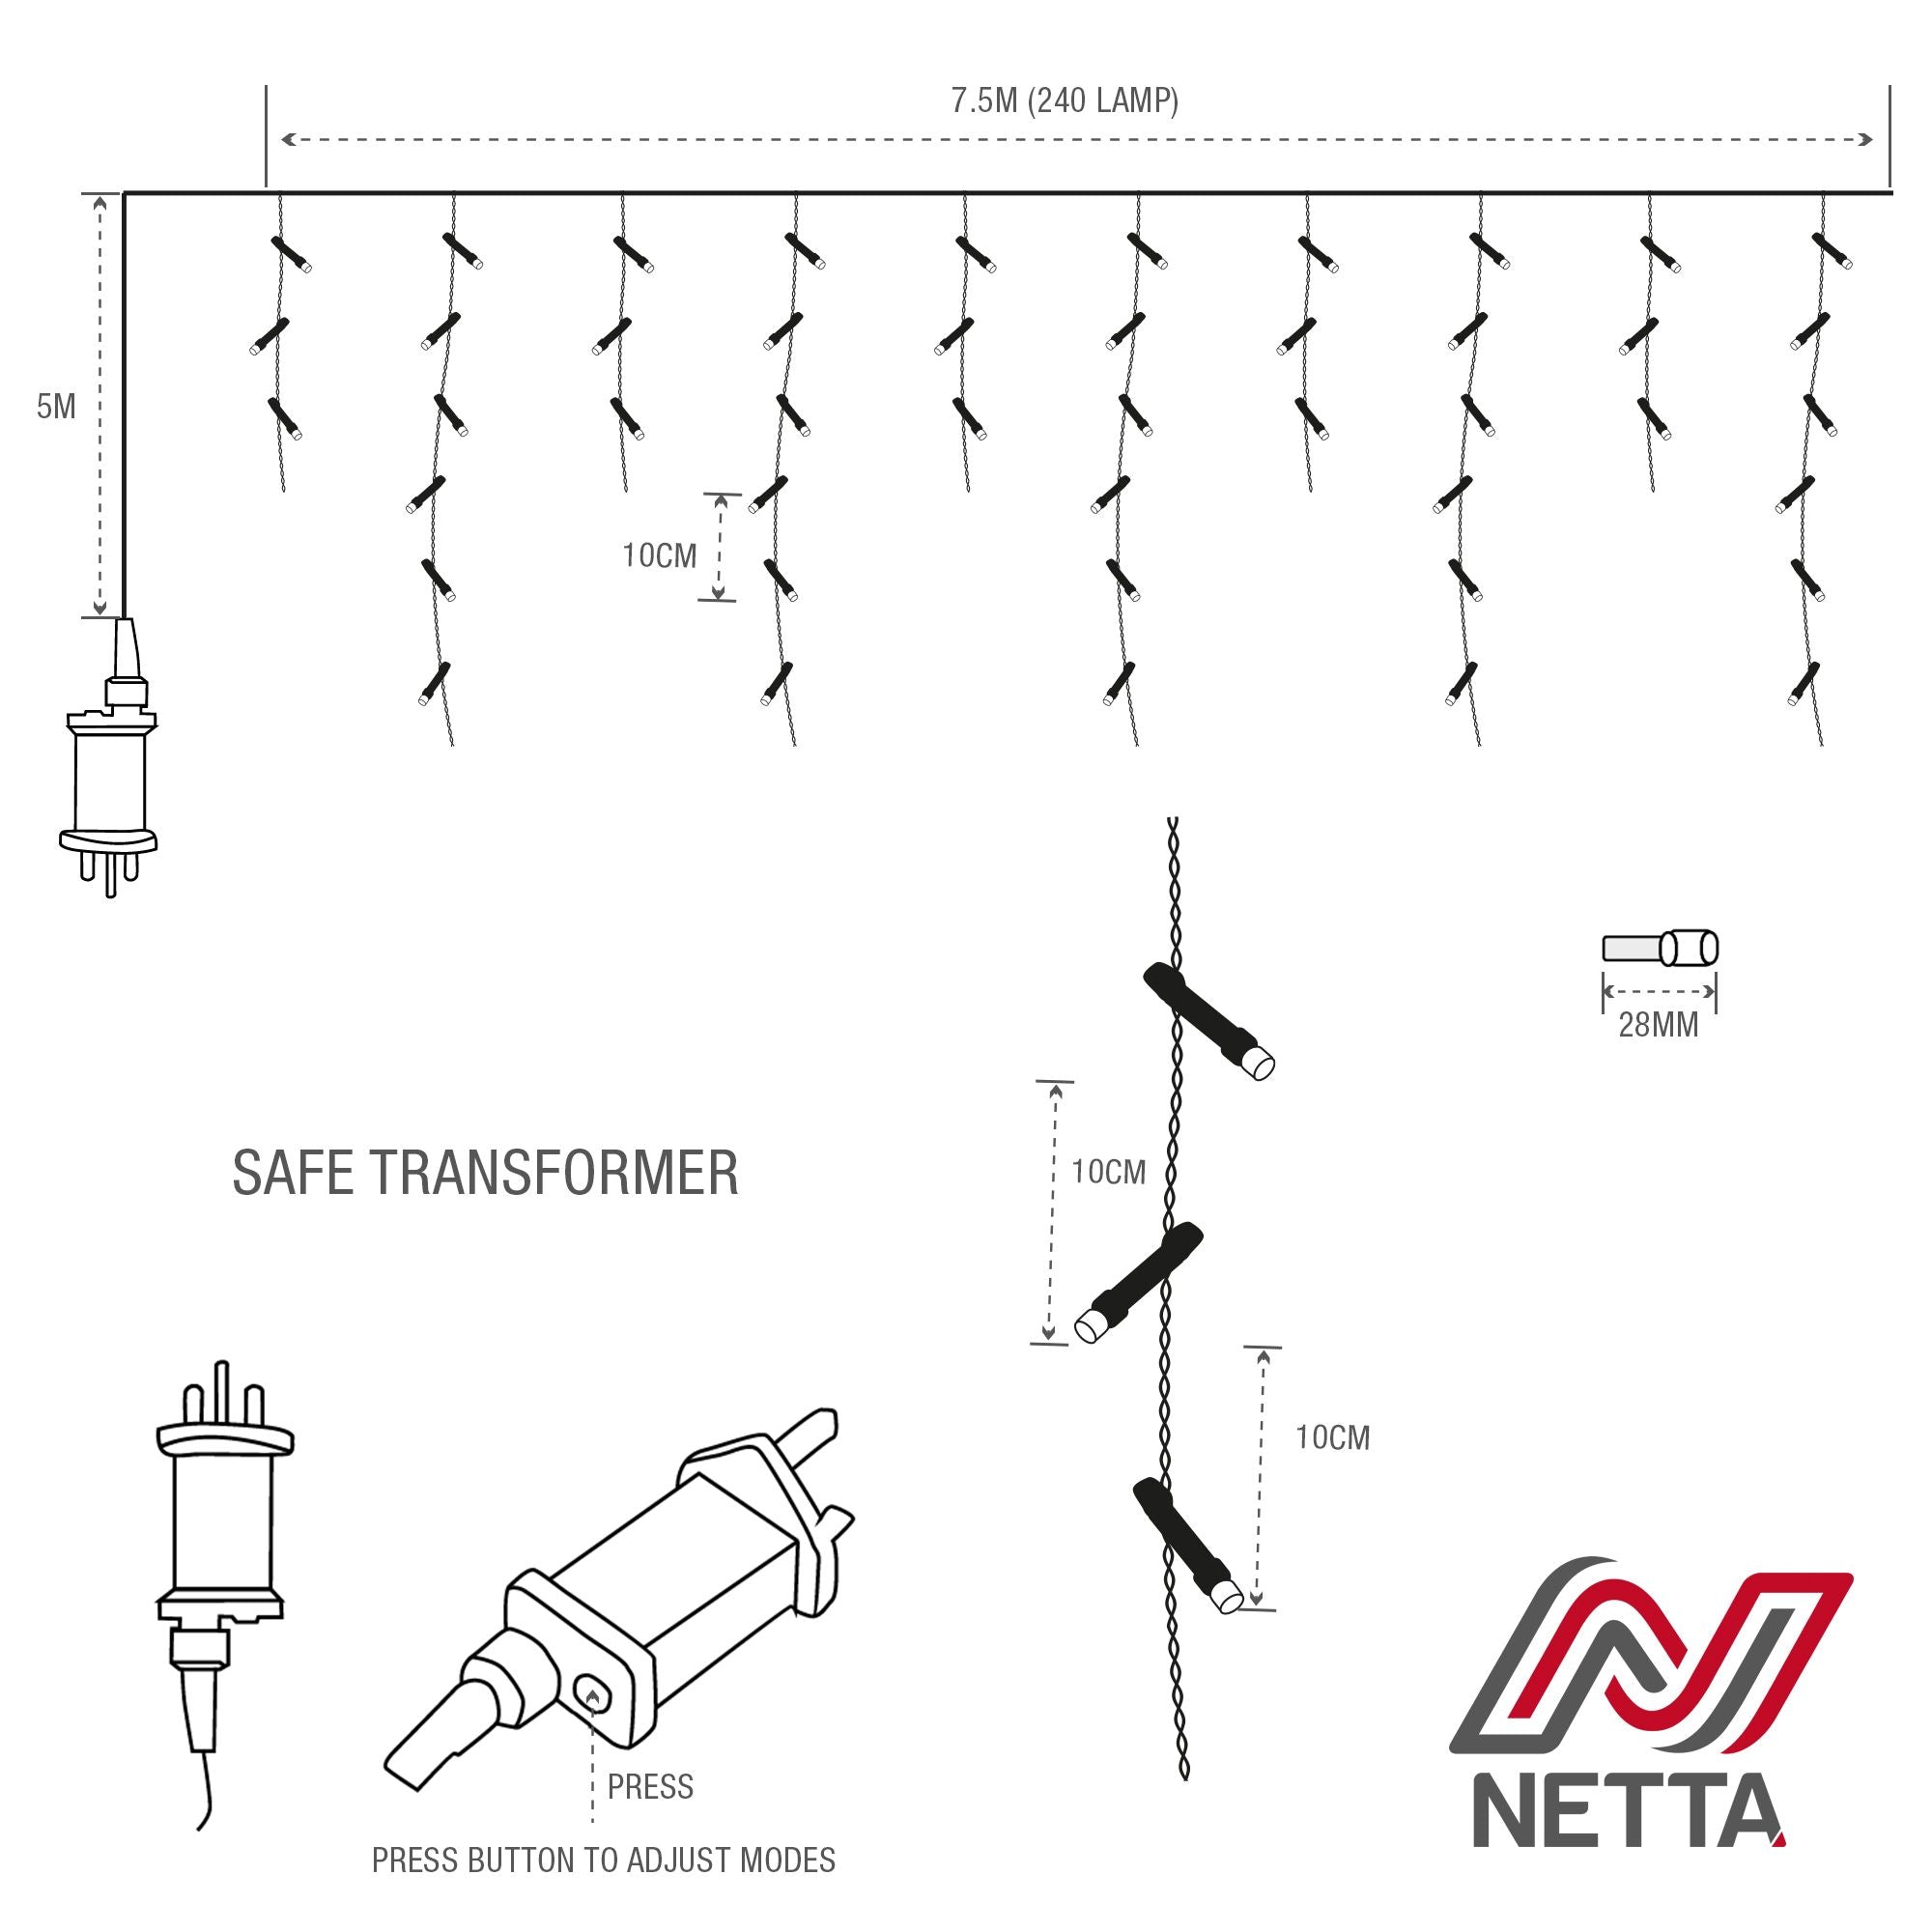 NETTA 240 LED Icicle Lights 7.5M Outdoor Christmas Lights - Cool White, with White Cable